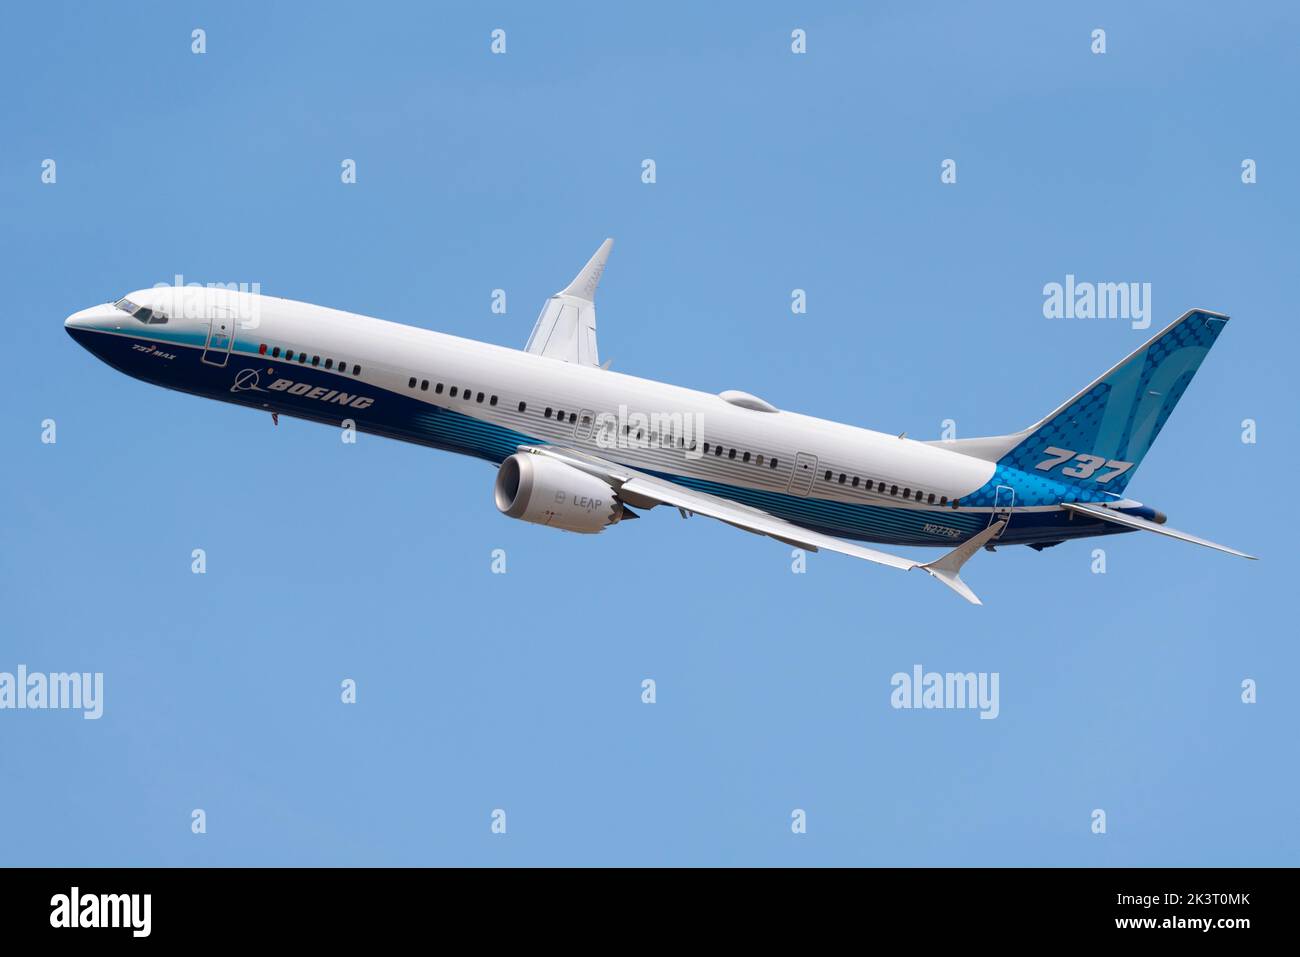 Boeing 737 MAX 10 airliner jet plane, the new version of the MAX series, flying at the Farnborough International Airshow 2022. Latest version of MAX Stock Photo